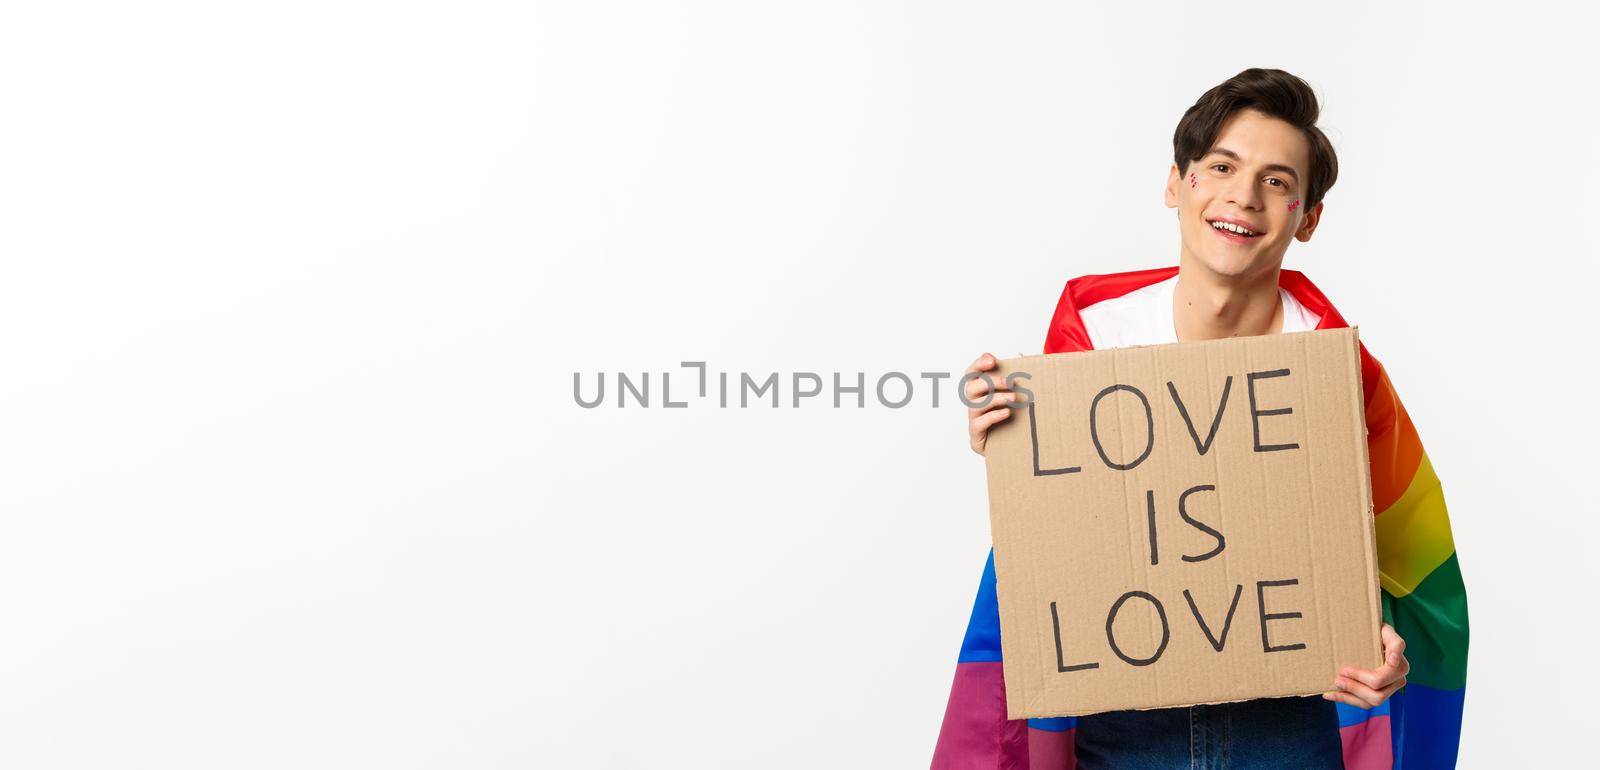 Smiling gay man activist holding sign love is love for lgbt pride parade, wearing Rainbow flag, standing over white background by Benzoix